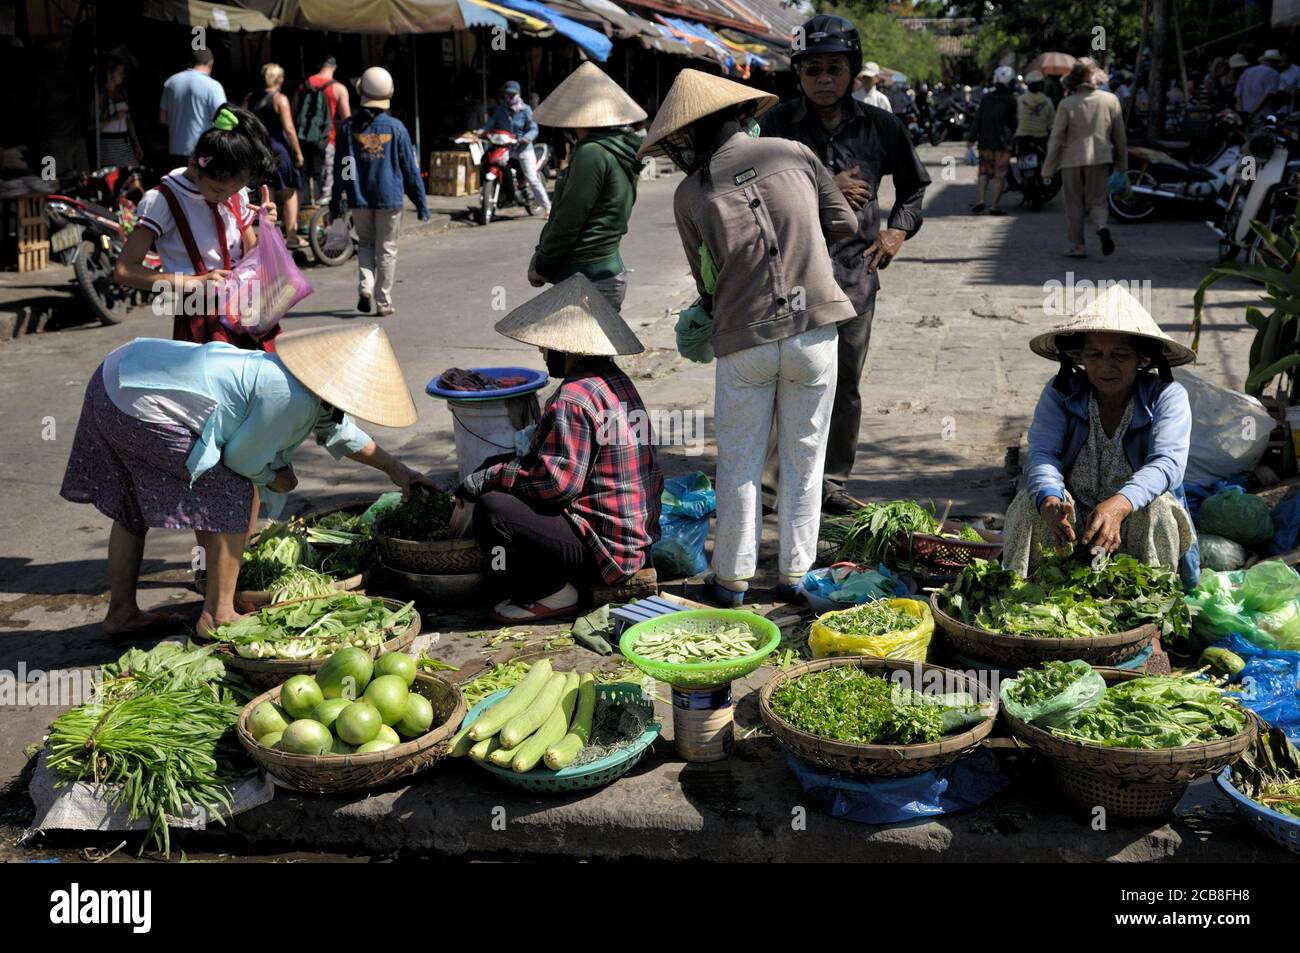 Women and vegetables at Hoi An market, Vietnam Stock Photo